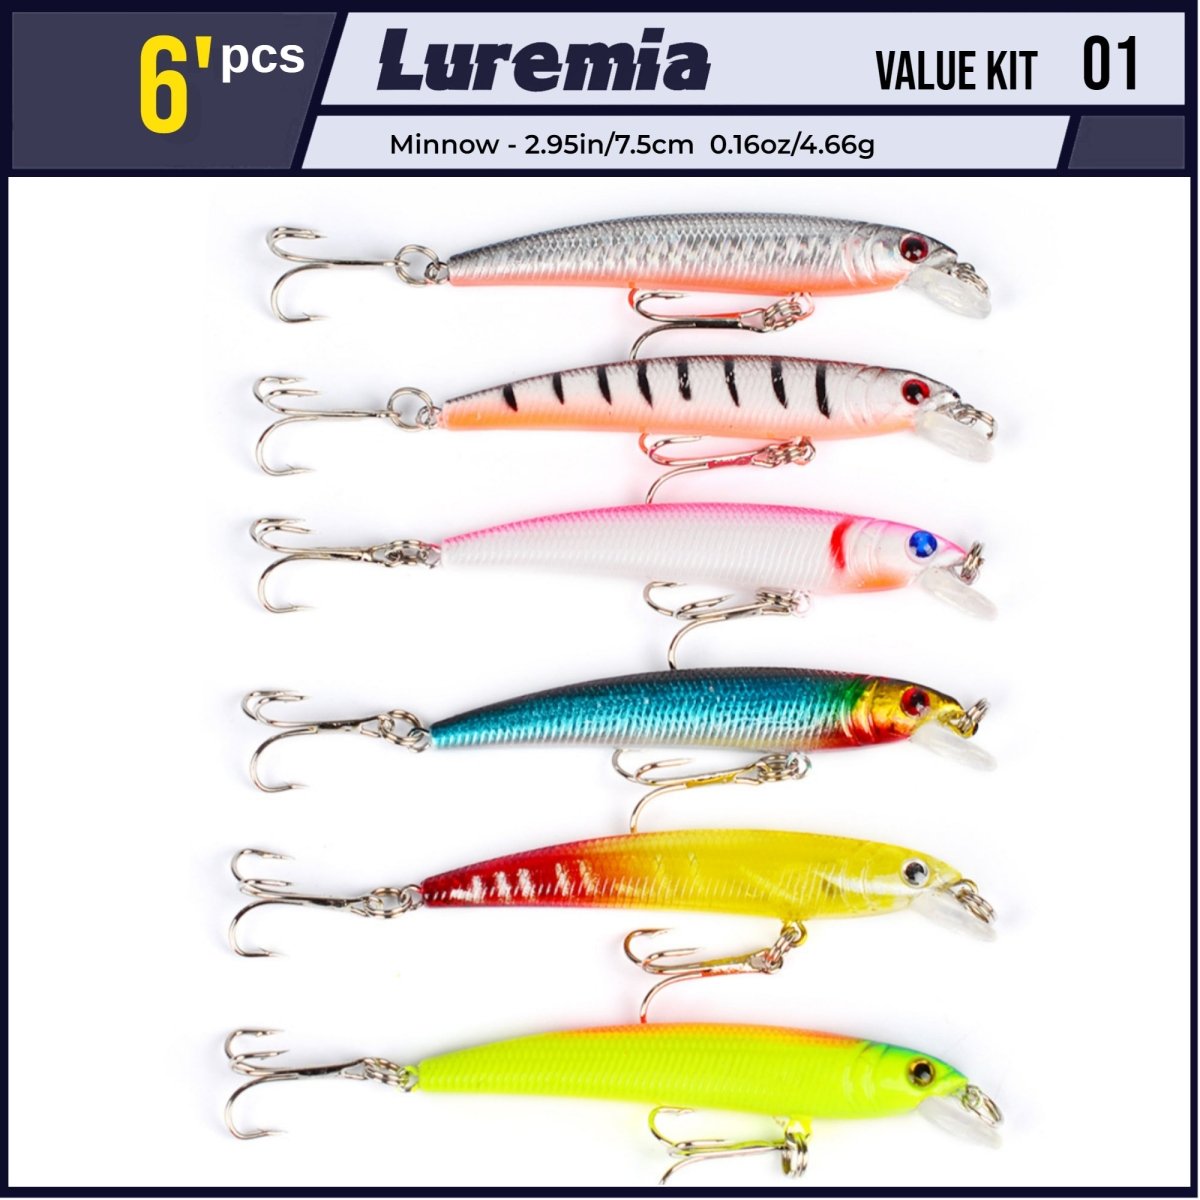 Lure Value Pack 01 (43pcs) - TopwaterValue PackLuremia Fishing